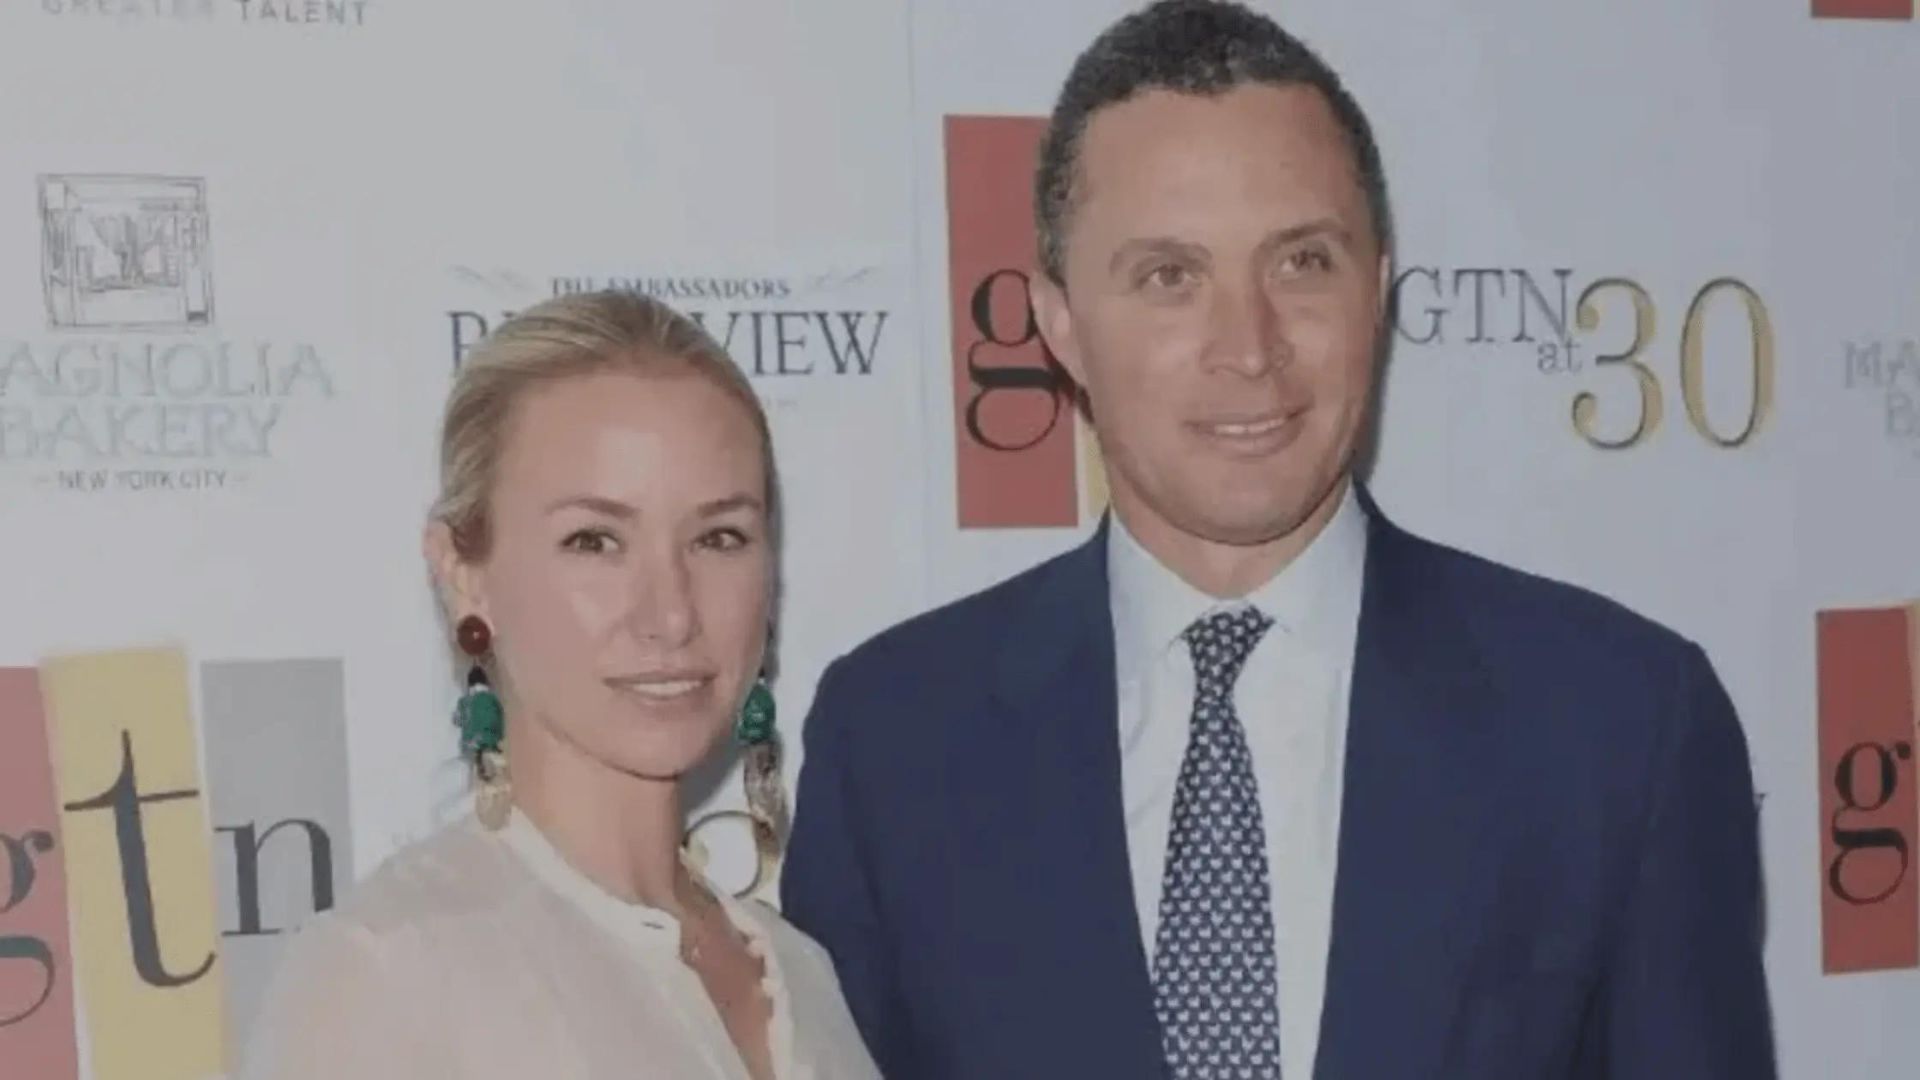 Harold Ford Jr - Net Worth, Bio, Wiki, Age, Family, Friends, Height & Salary